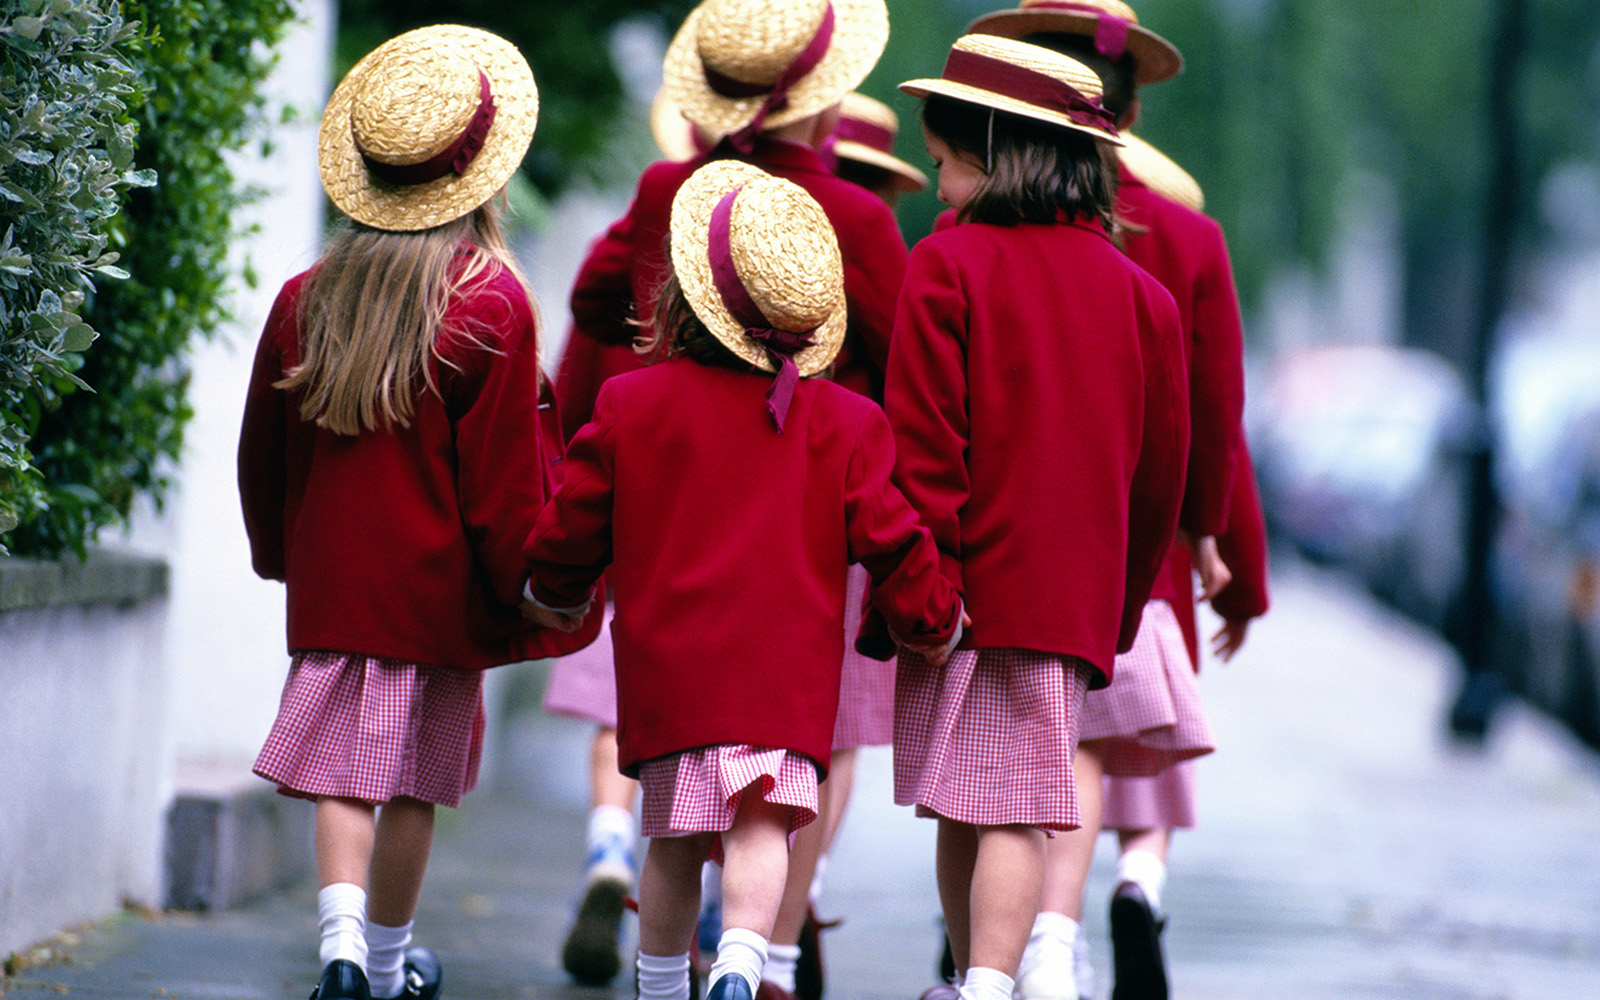 What's the legal age a child walk to school alone in Australia? | Better Homes and Gardens